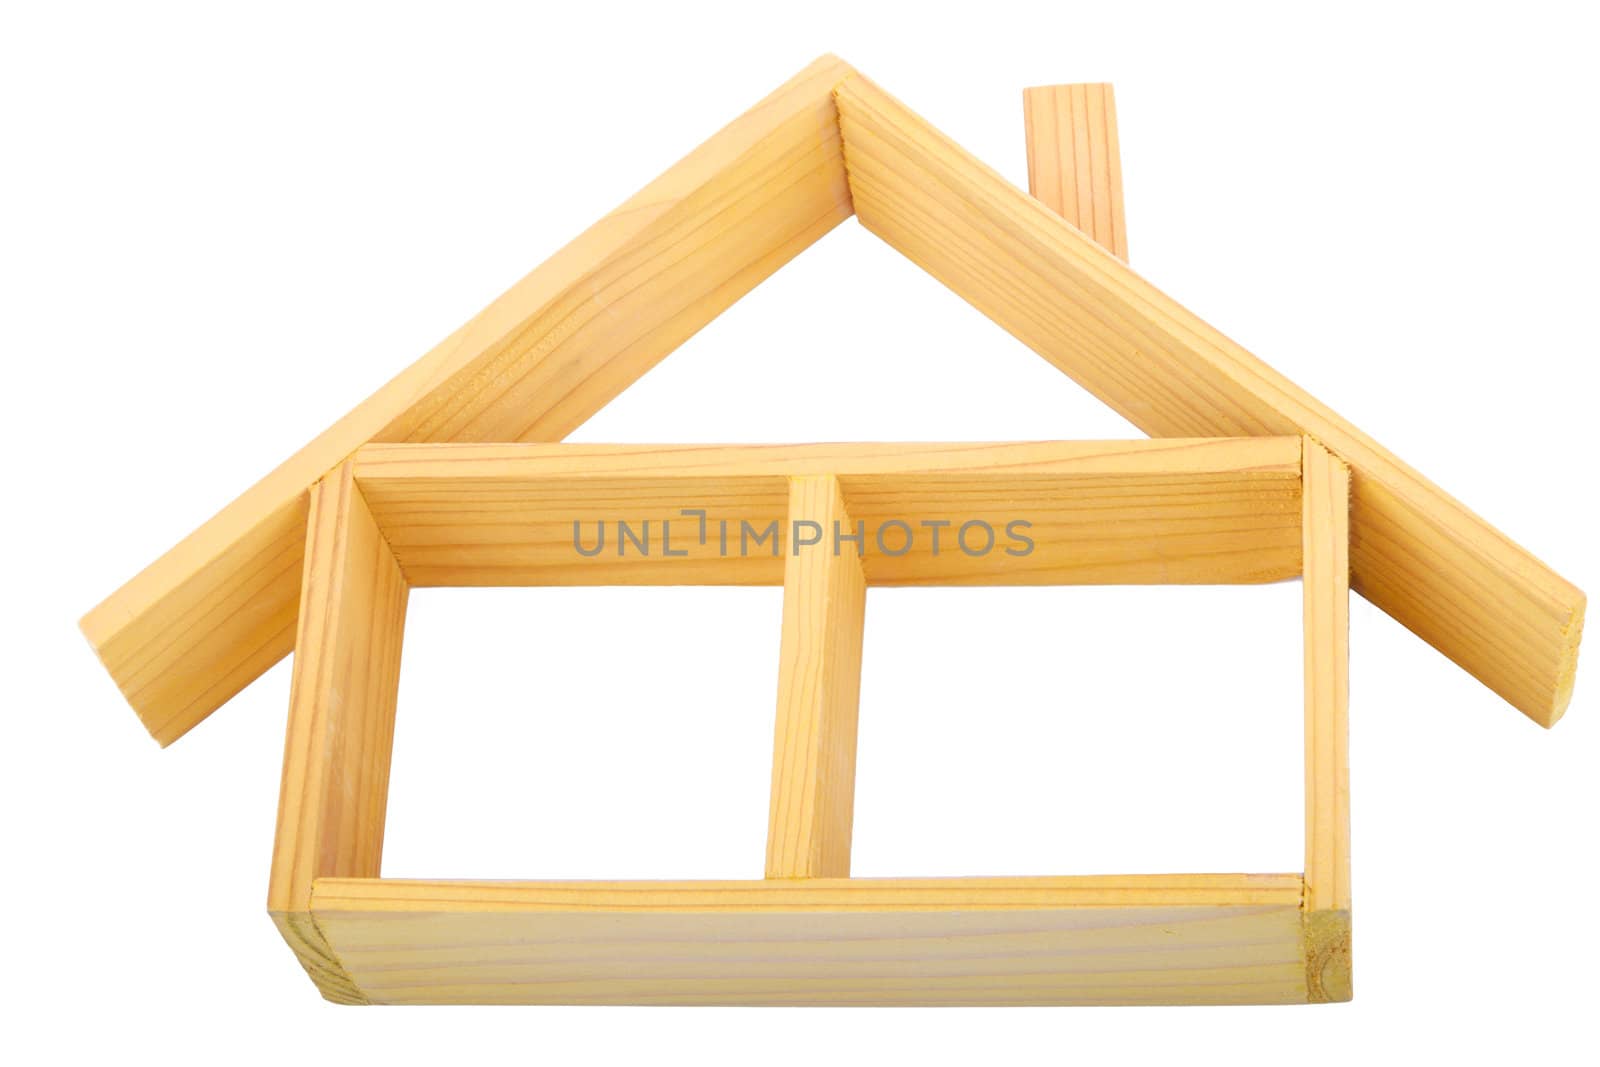 Tilted view of an isolated wooden house